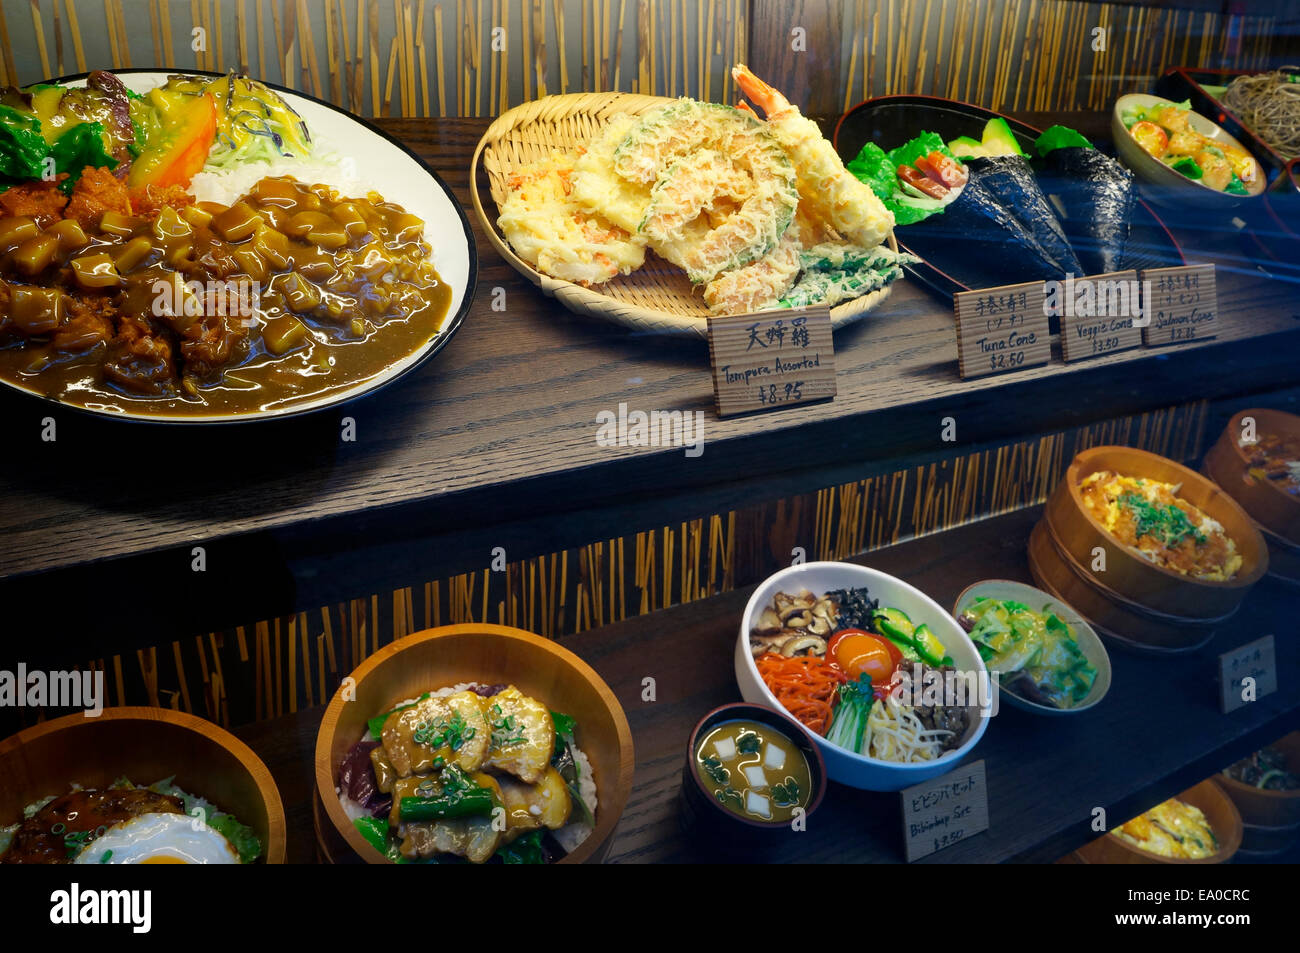 Japanese dishes displayed in the window of a restaurant, Vancouver, British Columbia, Canada Stock Photo